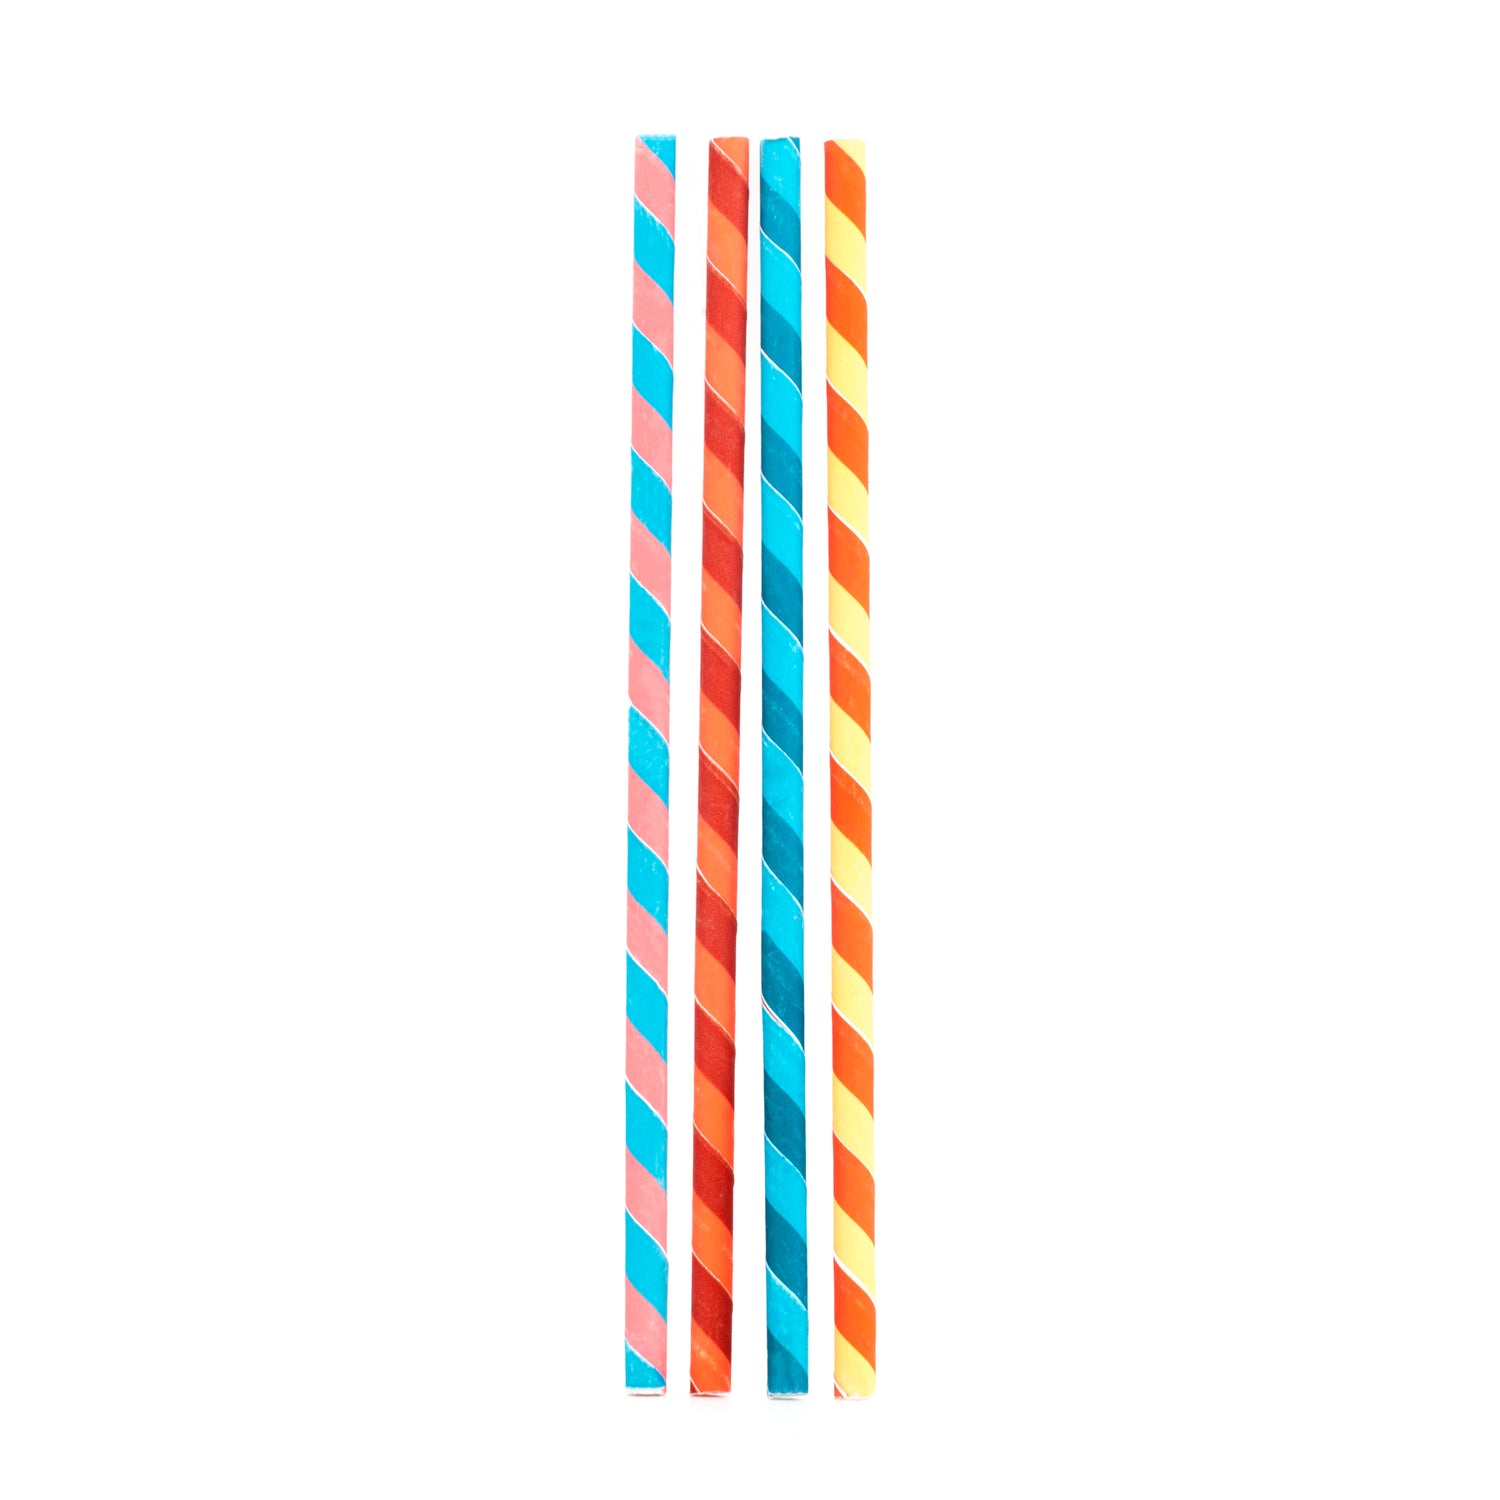 https://cdn.shopify.com/s/files/1/1140/3964/products/CU206-A-Party-Stripes-Paper-Straws_-Box-of-144.jpg?v=1573167751&width=1500